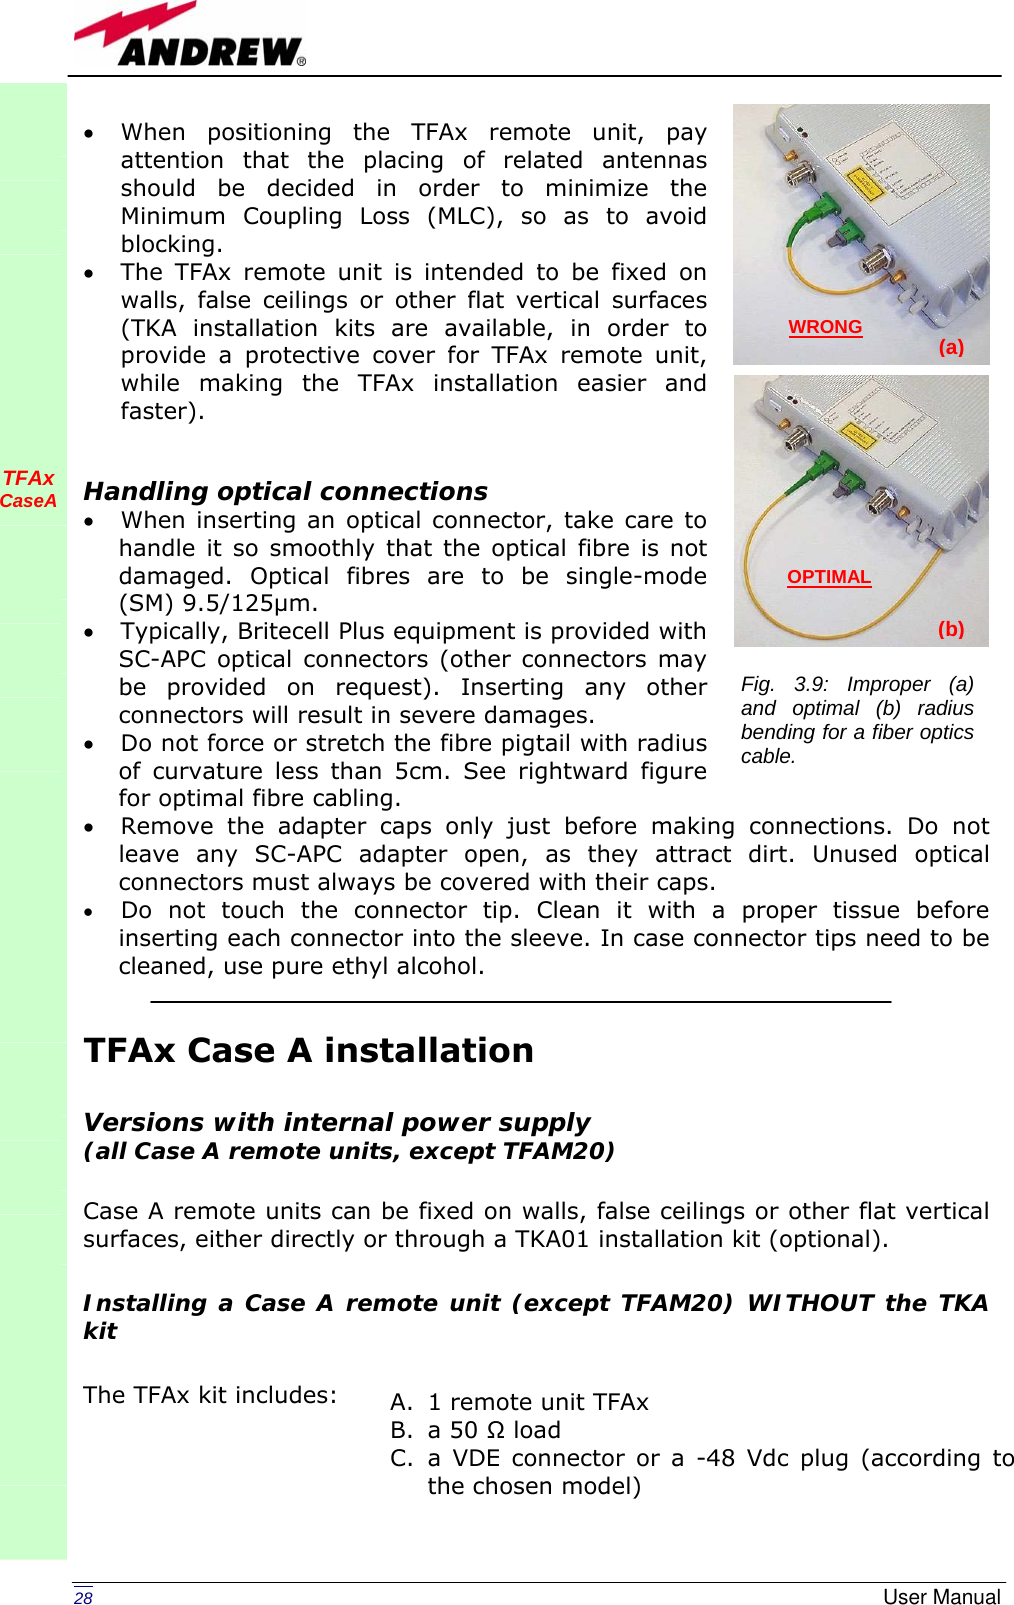   28  User Manual• When positioning the TFAx remote unit, pay attention that the placing of related antennas should be decided in order to minimize the Minimum Coupling Loss (MLC), so as to avoid blocking. • The TFAx remote unit is intended to be fixed on walls, false ceilings or other flat vertical surfaces (TKA installation kits are available, in order to provide a protective cover for TFAx remote unit, while making the TFAx installation easier and faster).   Handling optical connections • When inserting an optical connector, take care to handle it so smoothly that the optical fibre is not damaged. Optical fibres are to be single-mode (SM) 9.5/125µm. • Typically, Britecell Plus equipment is provided with SC-APC optical connectors (other connectors may be provided on request). Inserting any other connectors will result in severe damages. • Do not force or stretch the fibre pigtail with radius of curvature less than 5cm. See rightward figure for optimal fibre cabling. • Remove the adapter caps only just before making connections. Do not leave any SC-APC adapter open, as they attract dirt. Unused optical connectors must always be covered with their caps. • Do not touch the connector tip. Clean it with a proper tissue before inserting each connector into the sleeve. In case connector tips need to be cleaned, use pure ethyl alcohol.   TFAx Case A installation   Versions with internal power supply  (all Case A remote units, except TFAM20)  Case A remote units can be fixed on walls, false ceilings or other flat vertical surfaces, either directly or through a TKA01 installation kit (optional).  Installing a Case A remote unit (except TFAM20) WITHOUT the TKA kit  The TFAx kit includes:          TFAx CaseA               A. 1 remote unit TFAx  B. a 50 Ω load C. a VDE connector or a -48 Vdc plug (according to the chosen model) Fig. 3.9: Improper (a) and optimal (b) radius bending for a fiber optics cable. OPTIMAL (b) WRONG (a) 